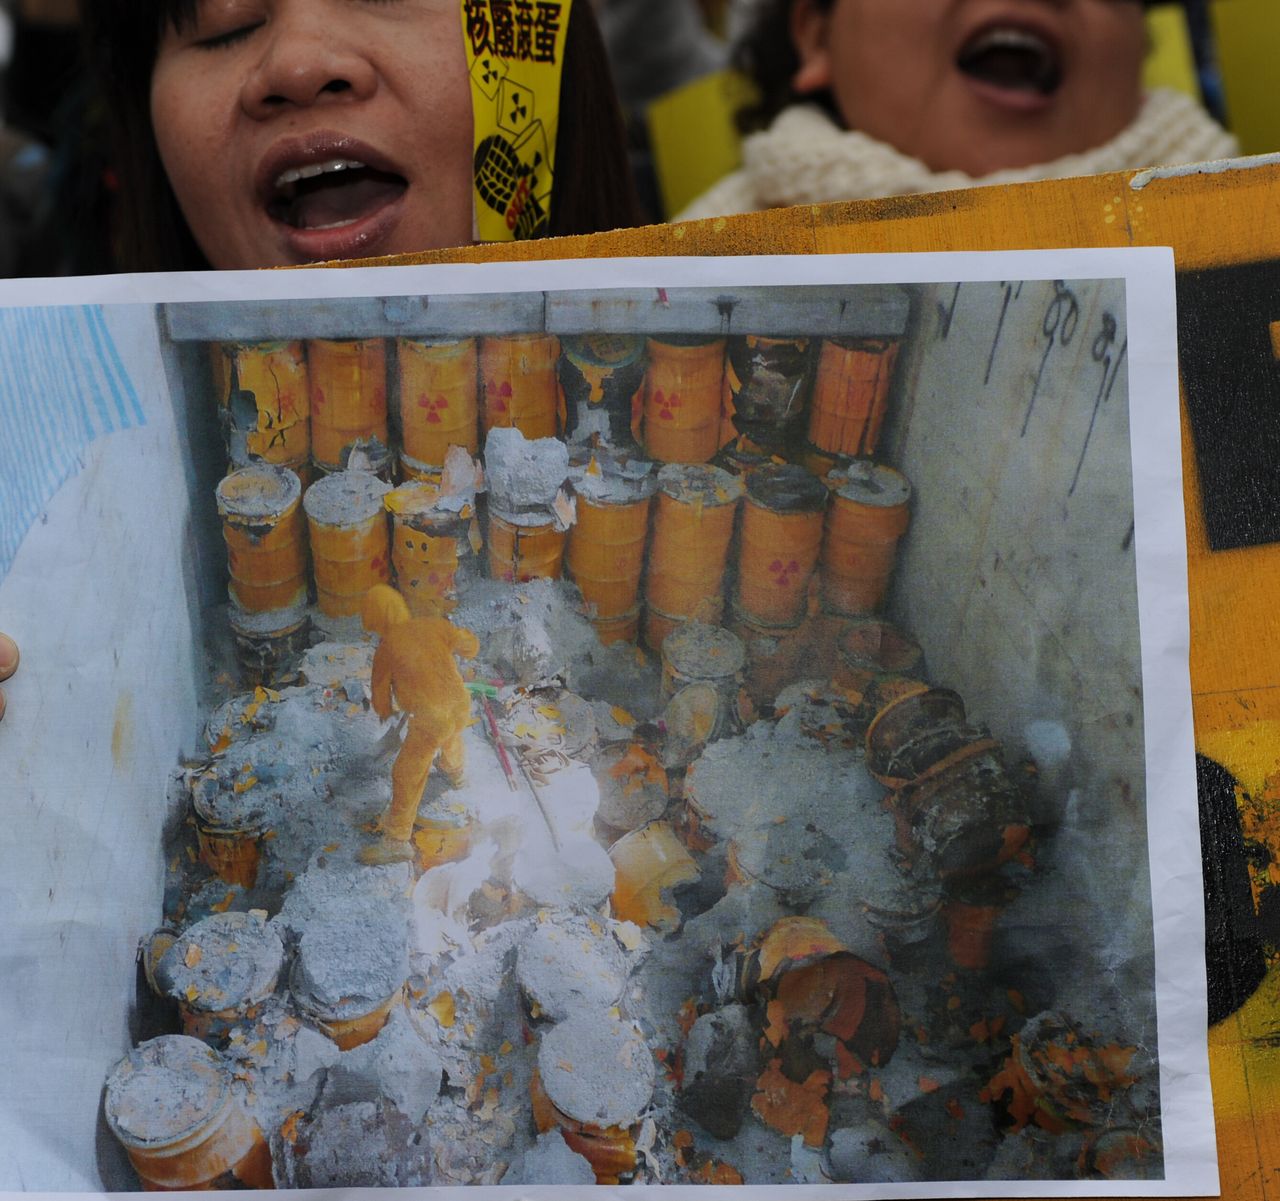 Demonstrators display a picture of nuclear waste stockpiled on Orchid Island during an anti-nuclear-power demonstration in Taipei on March 11, 2012. Thousands of people chanted anti-nuclear slogans and march through downtown Taipei demanding that the government shut down its three nuclear power plants in operation and halt construction of a half-completed one.